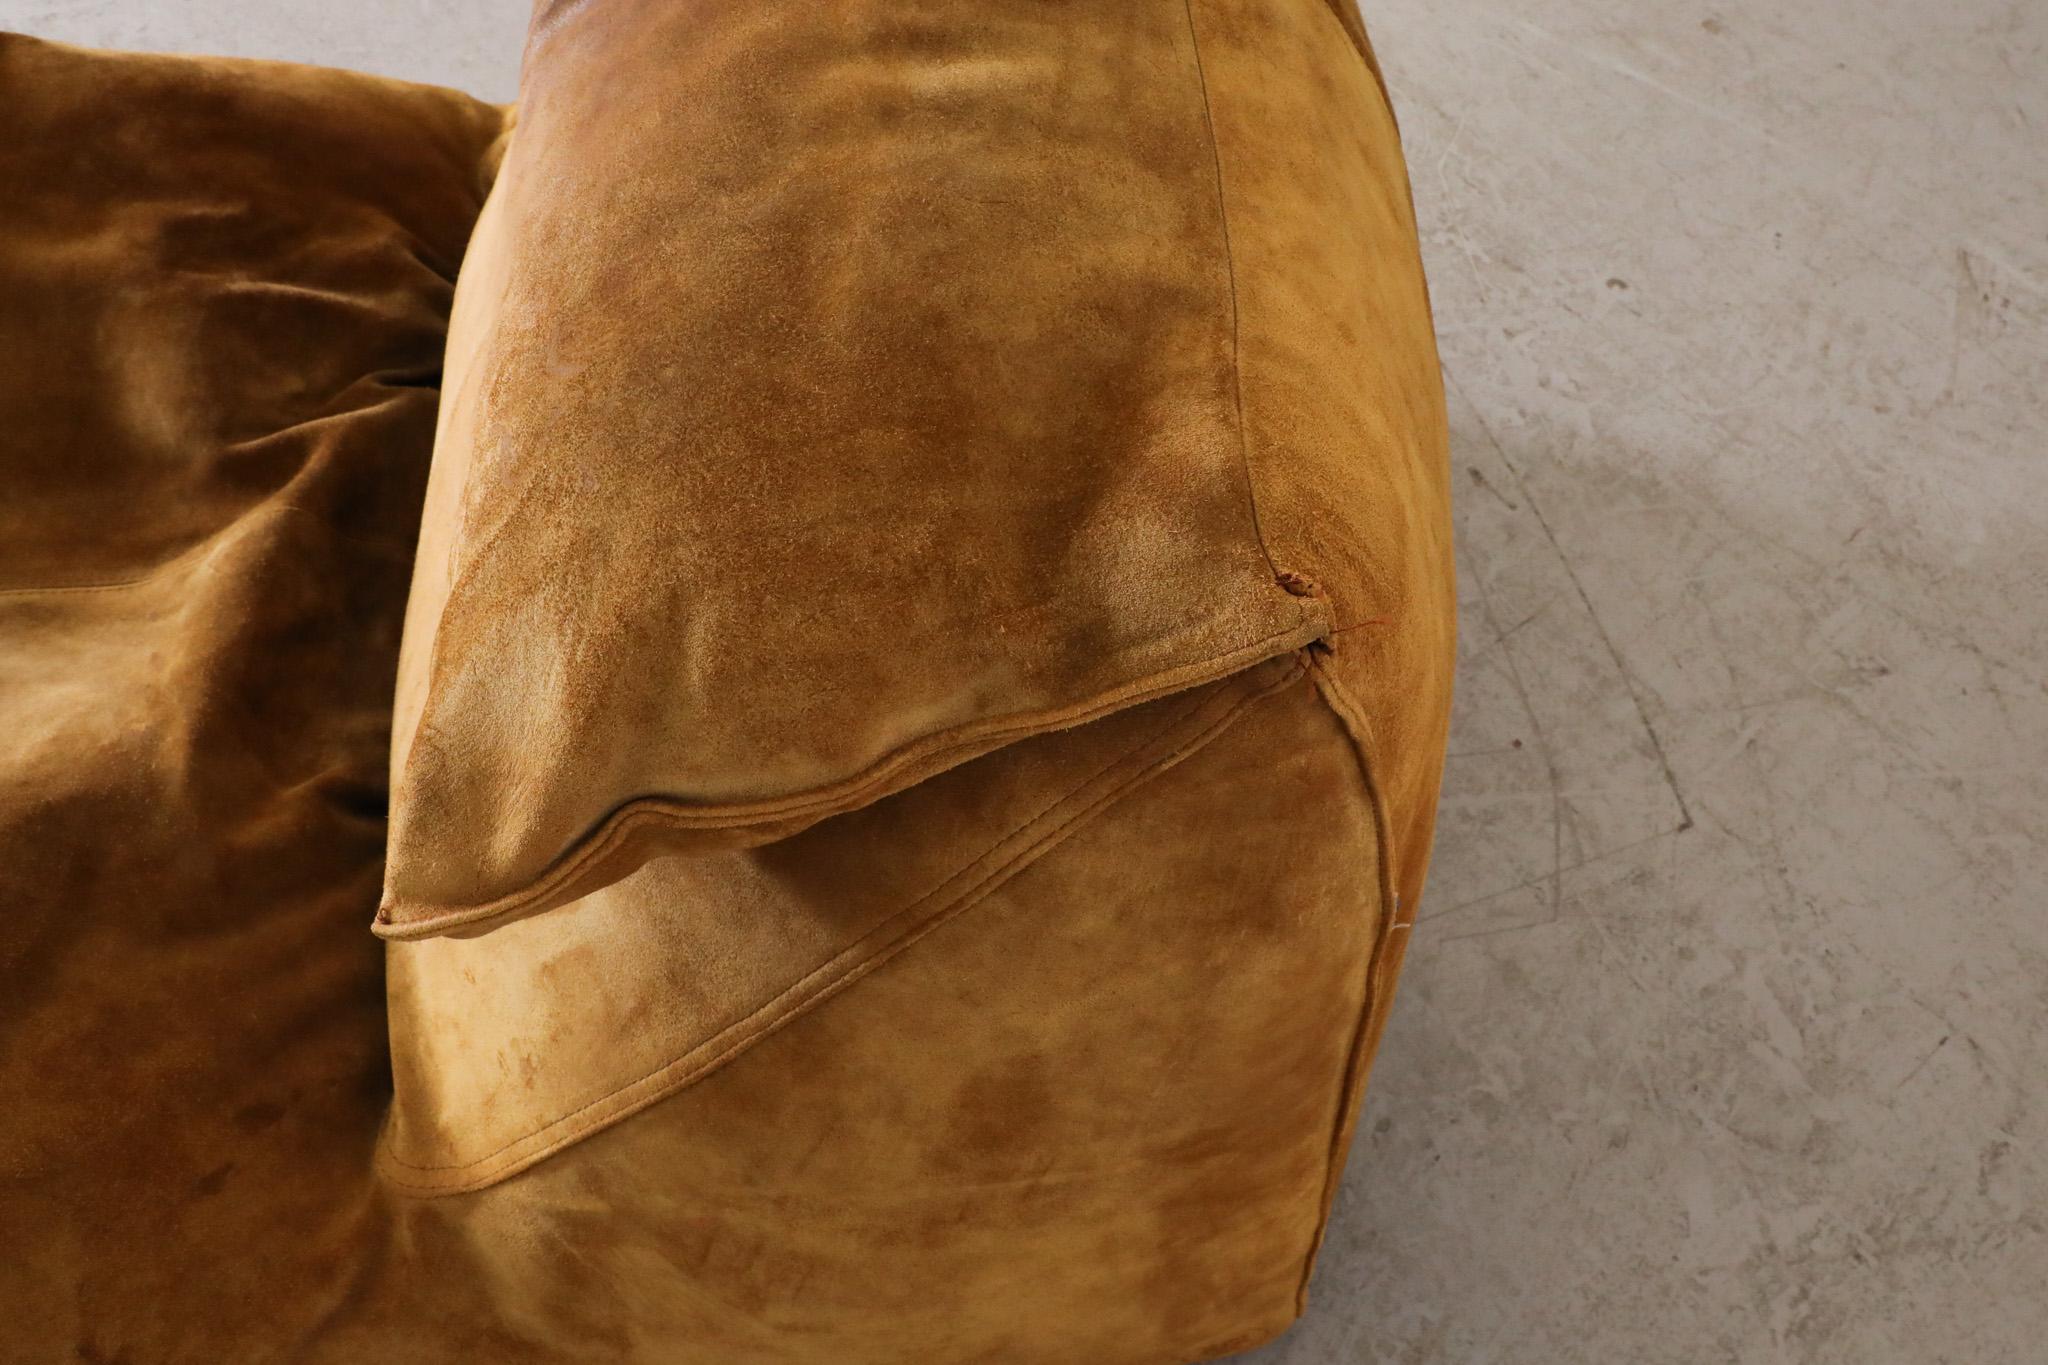 Le Bambole Chaise Lounge in Butterscotch Suede by Mario Bellini for C&B Italia For Sale 8